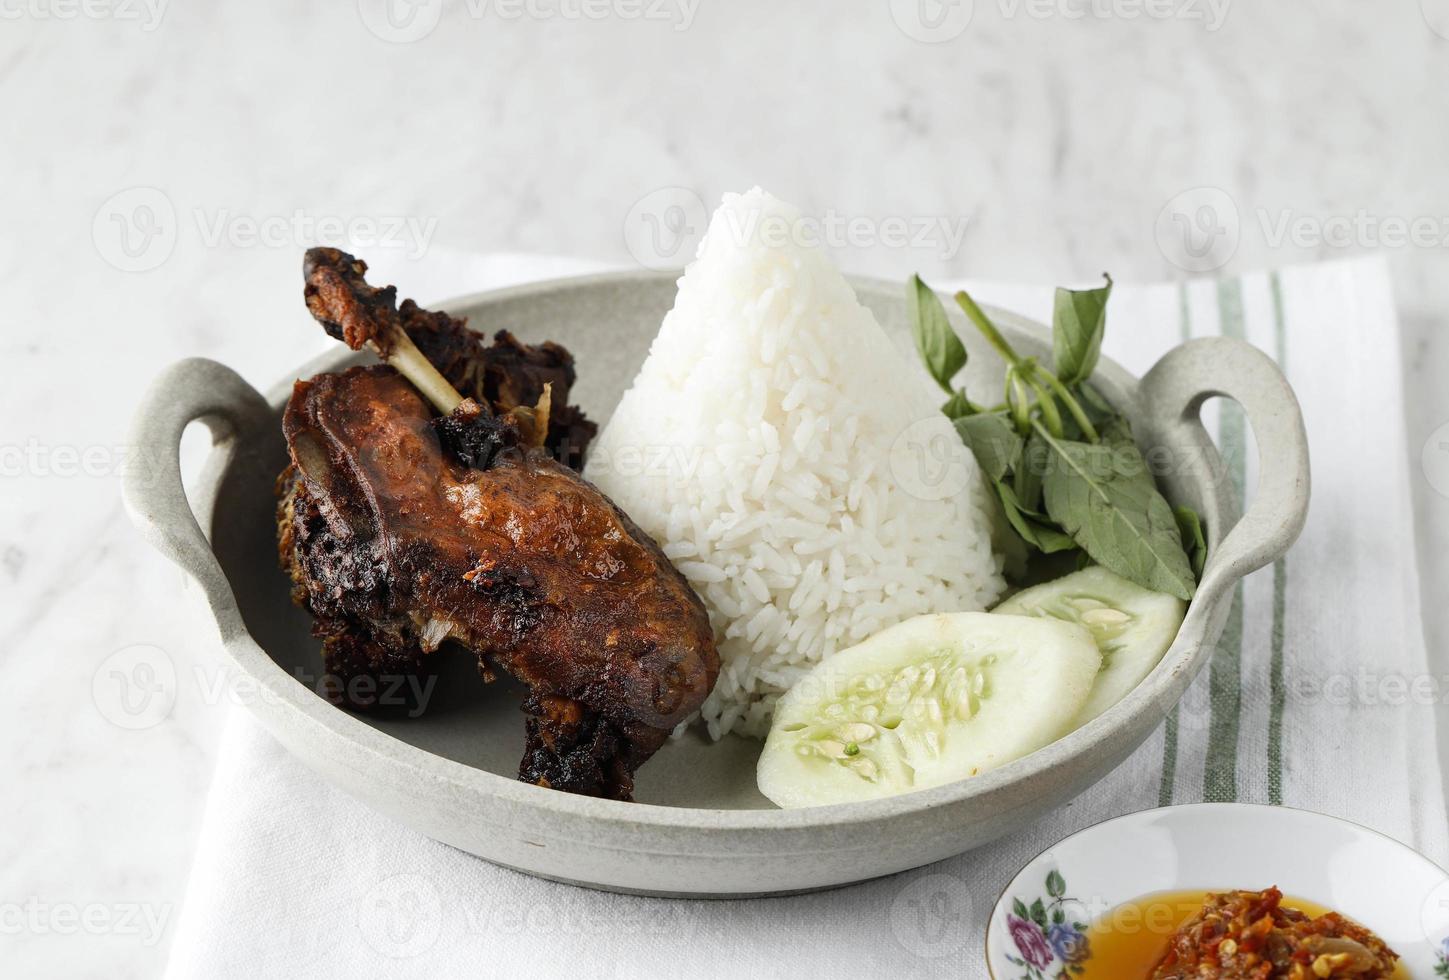 Bebek Ireng Madura or Black Duck Typical Street Food in Surabaya, East Java, Indonesia. Served with Cone Shape Warm White Rice and Sambal photo